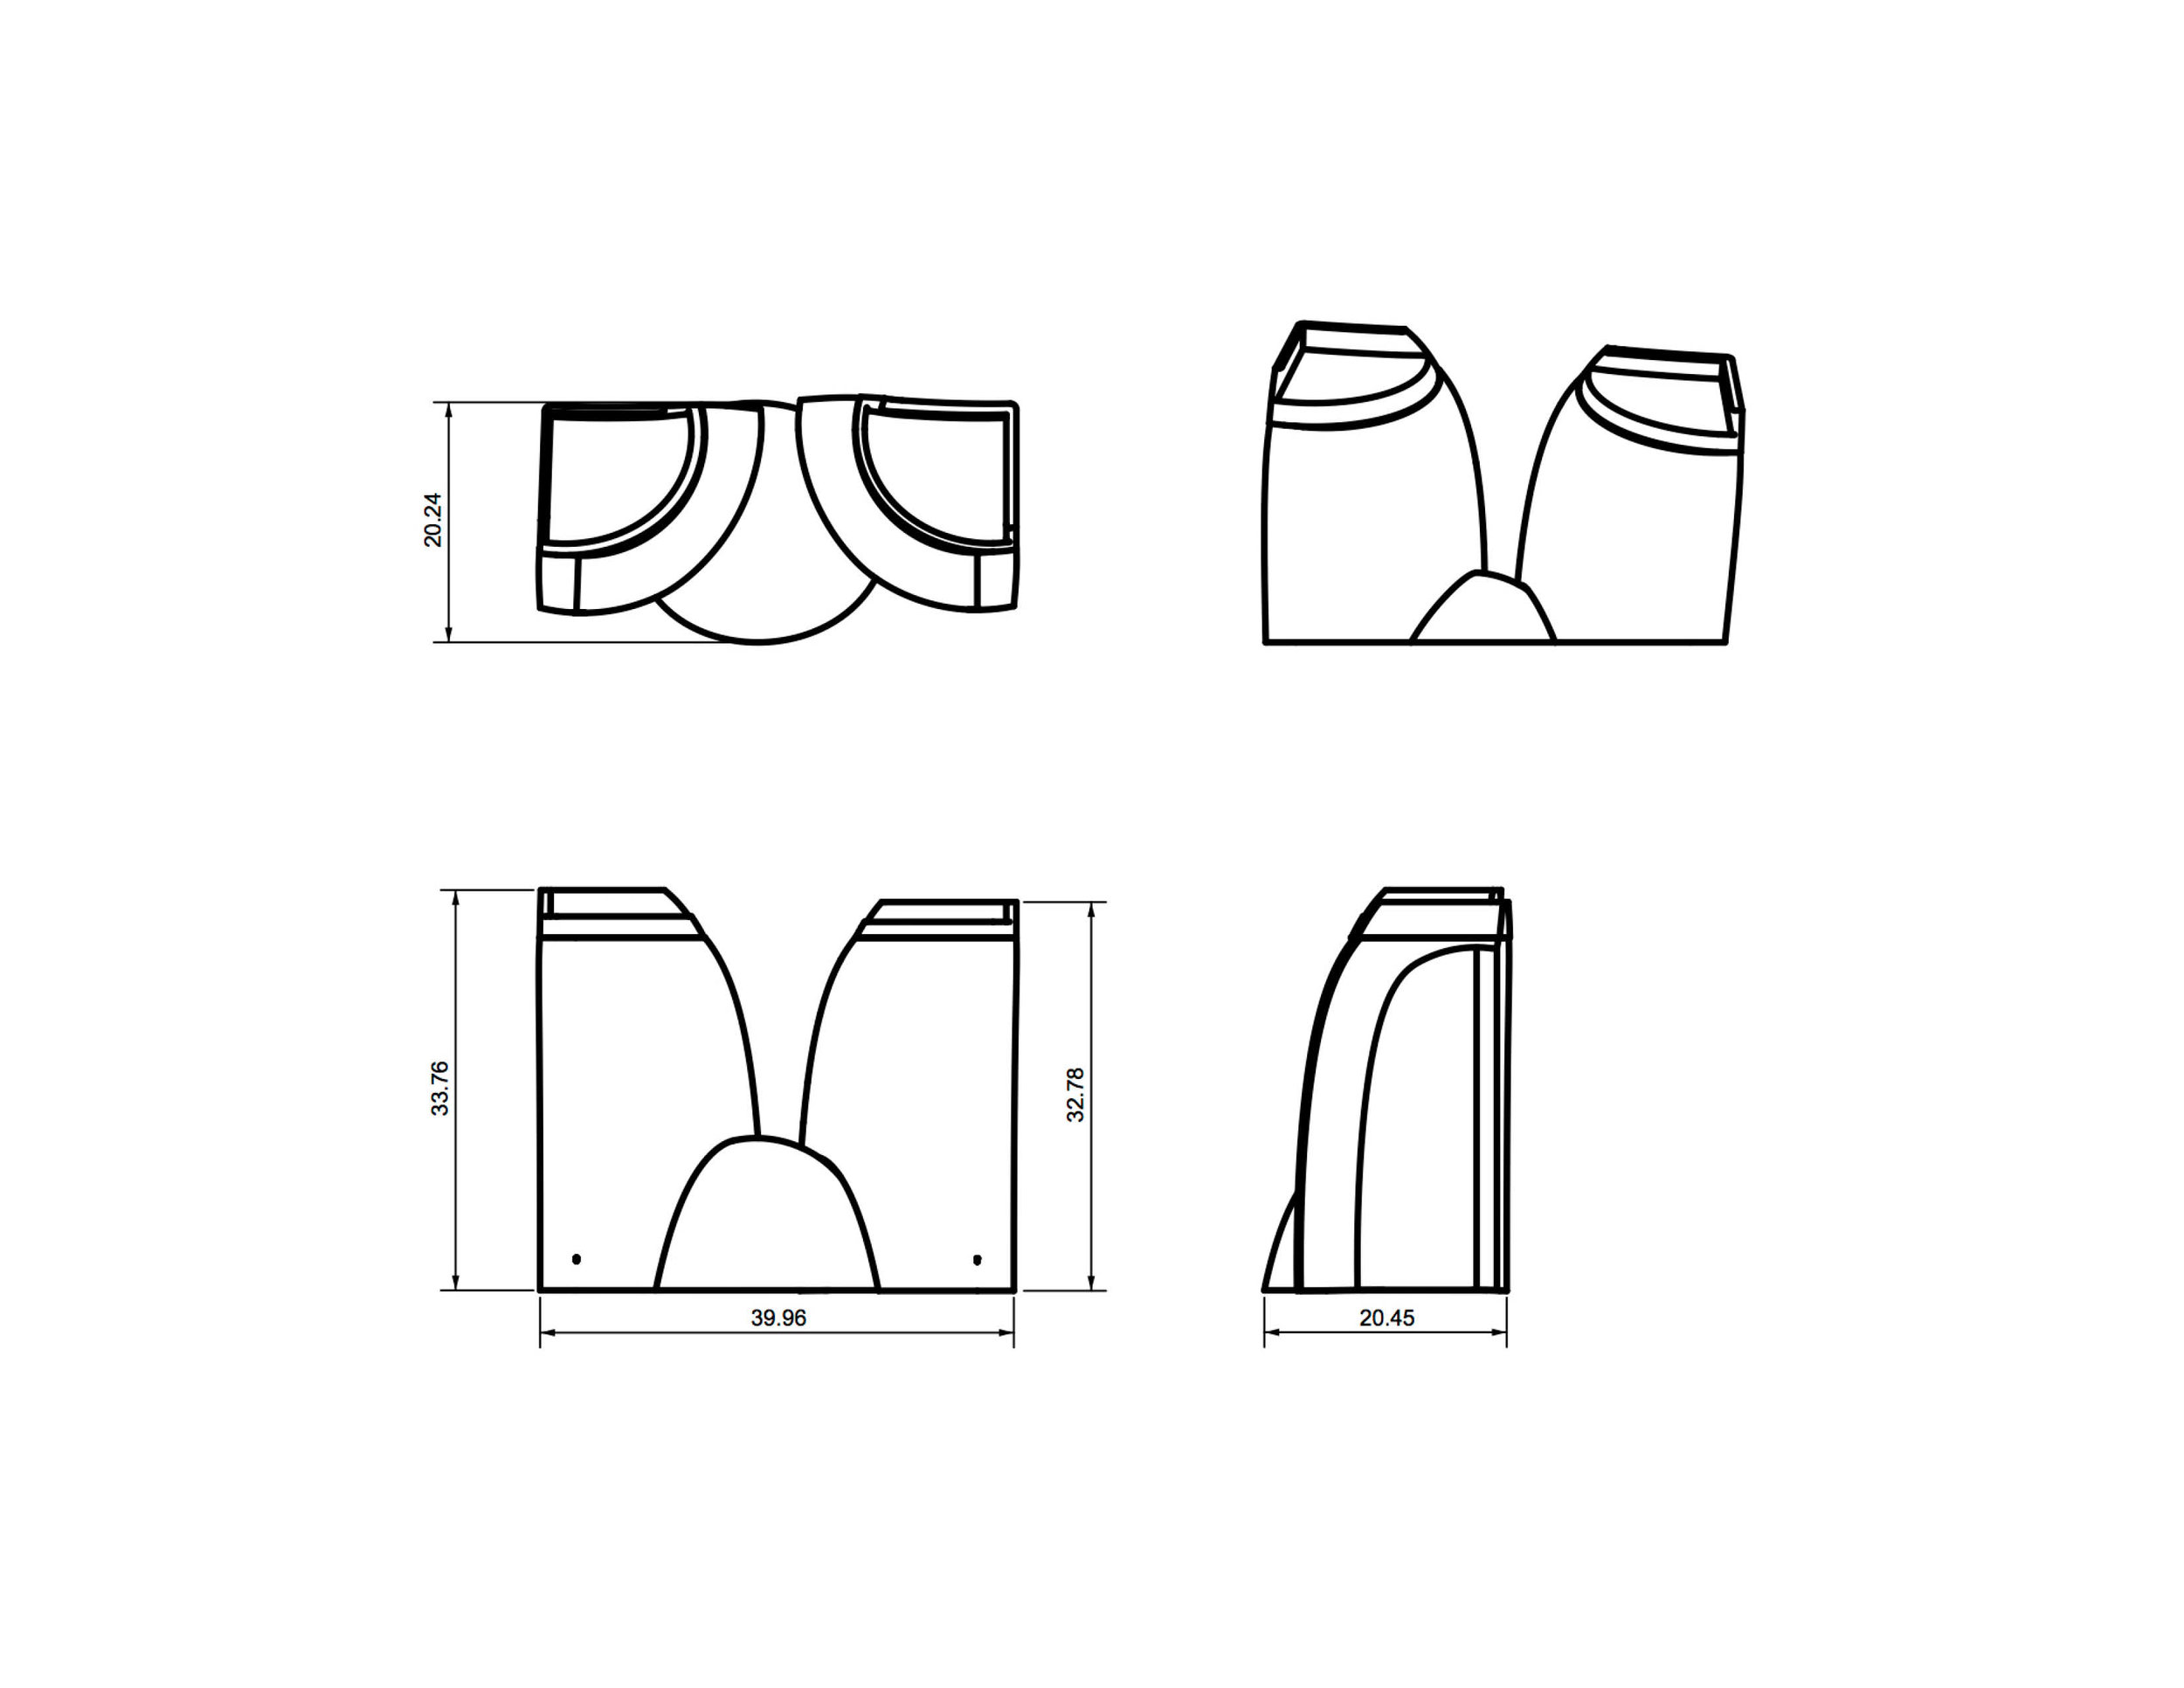 Stool Concept 3: Orthographic Projections, Page 1